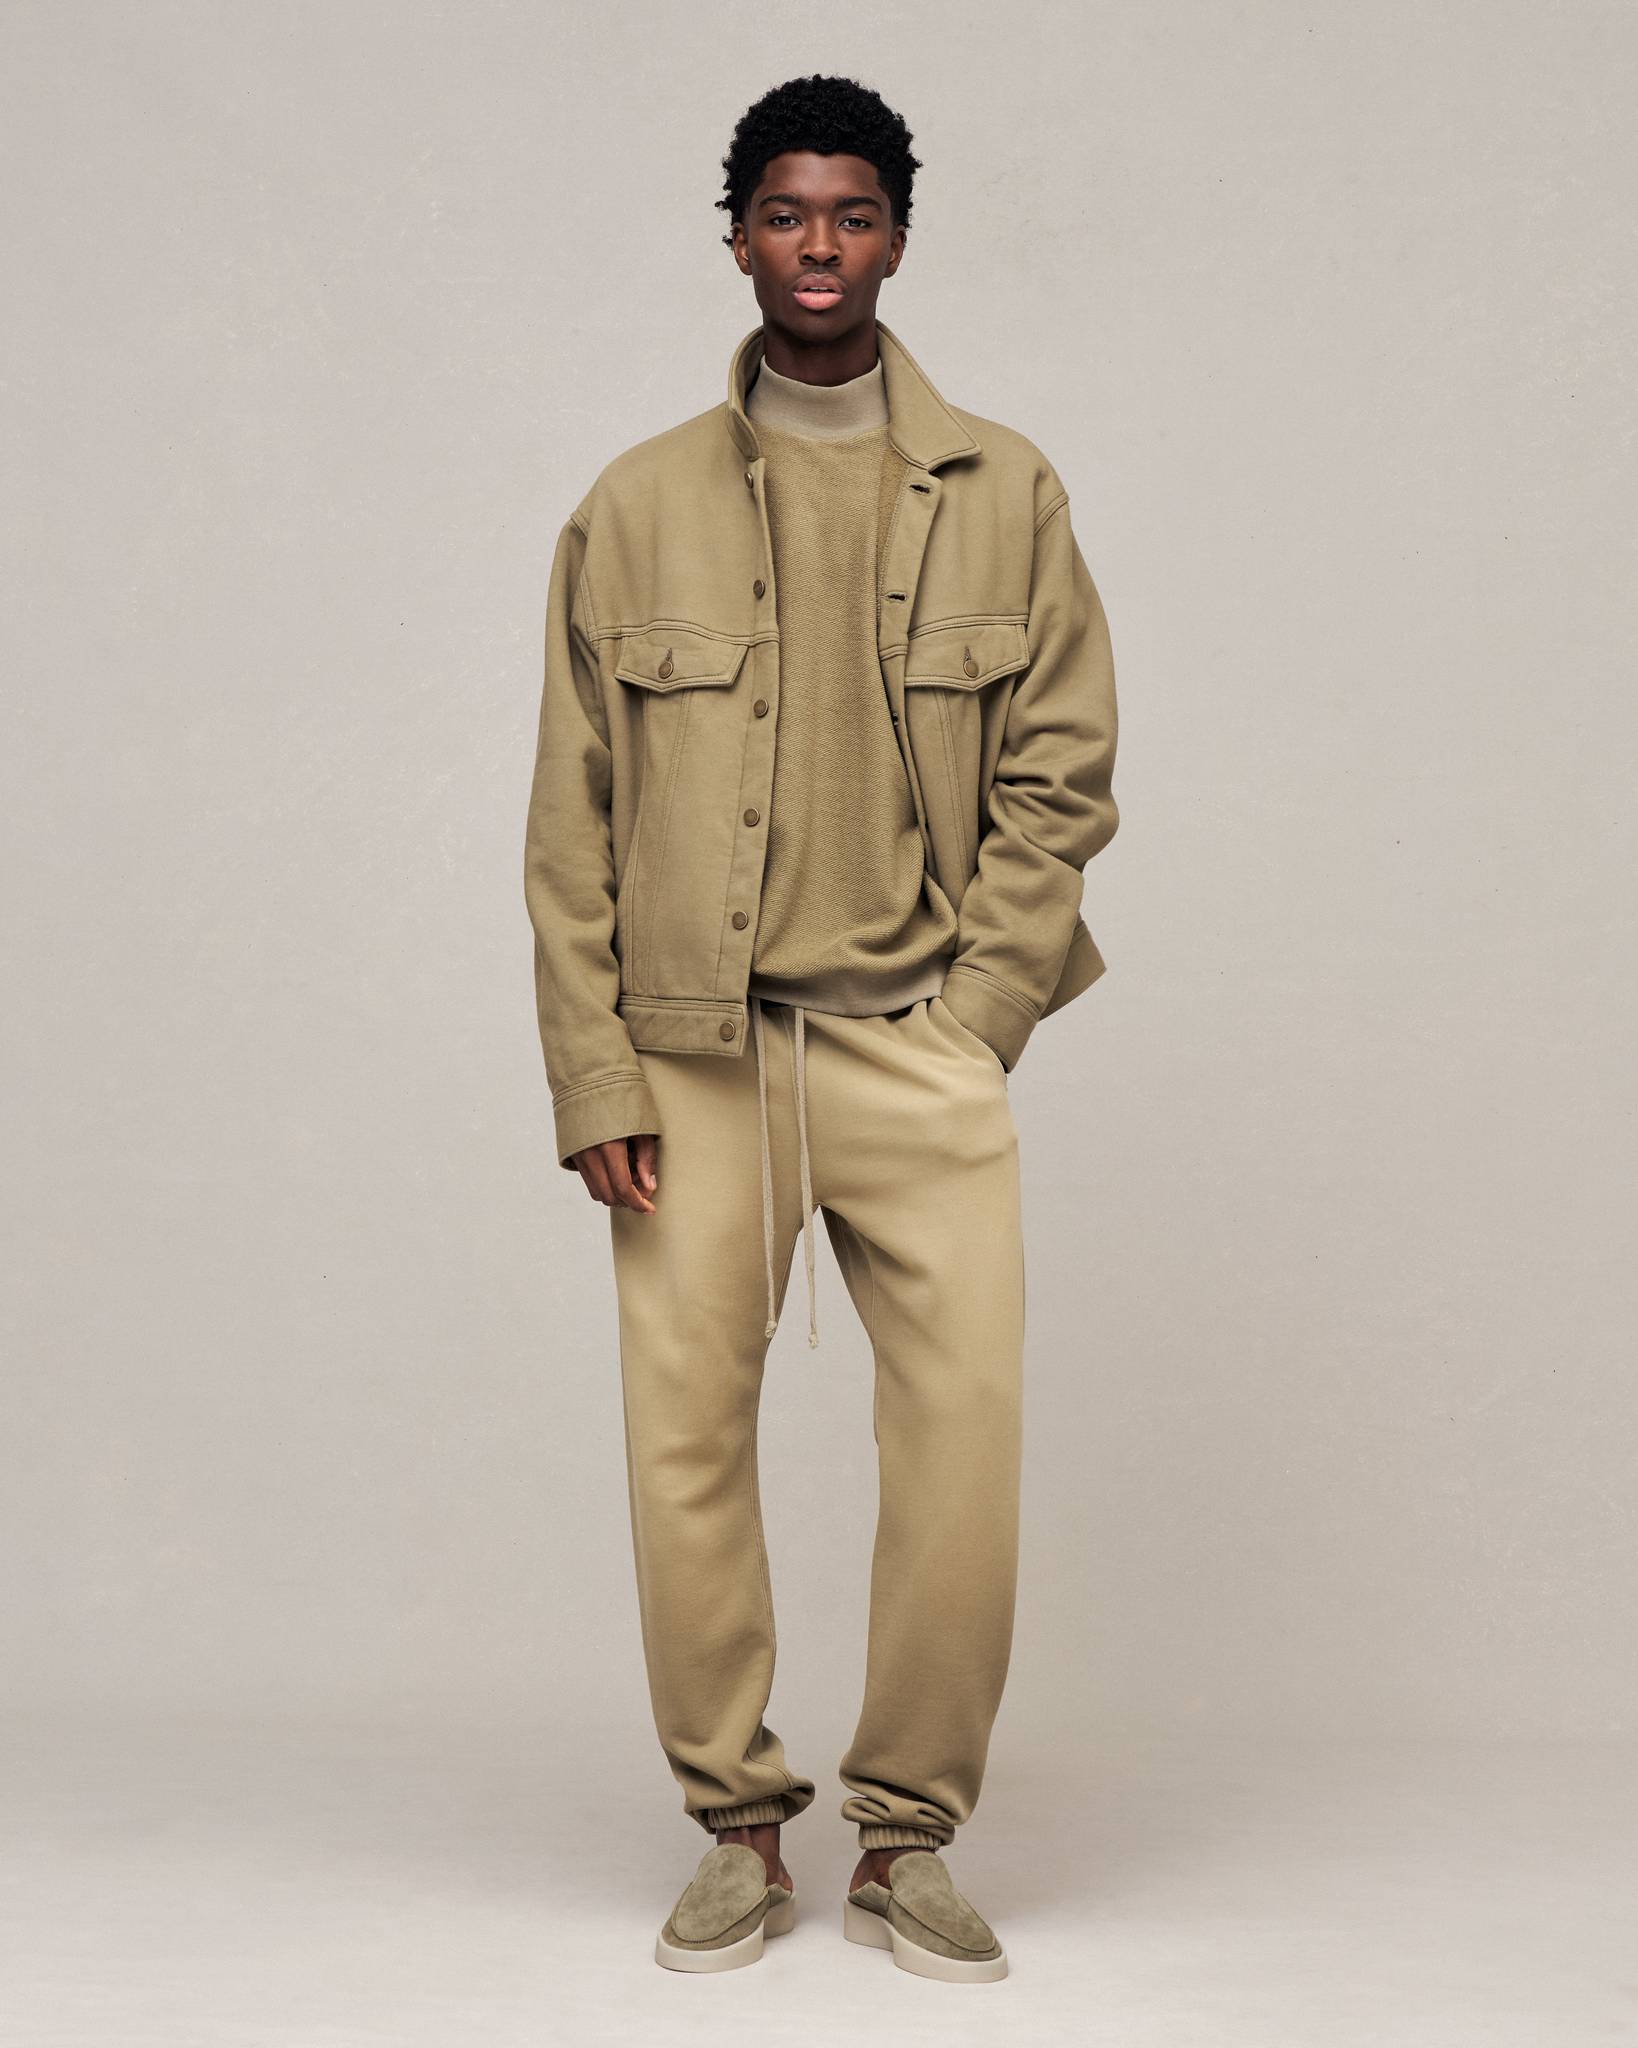 Seventh Collection | Fall/Winter Lookbook | Fear of God